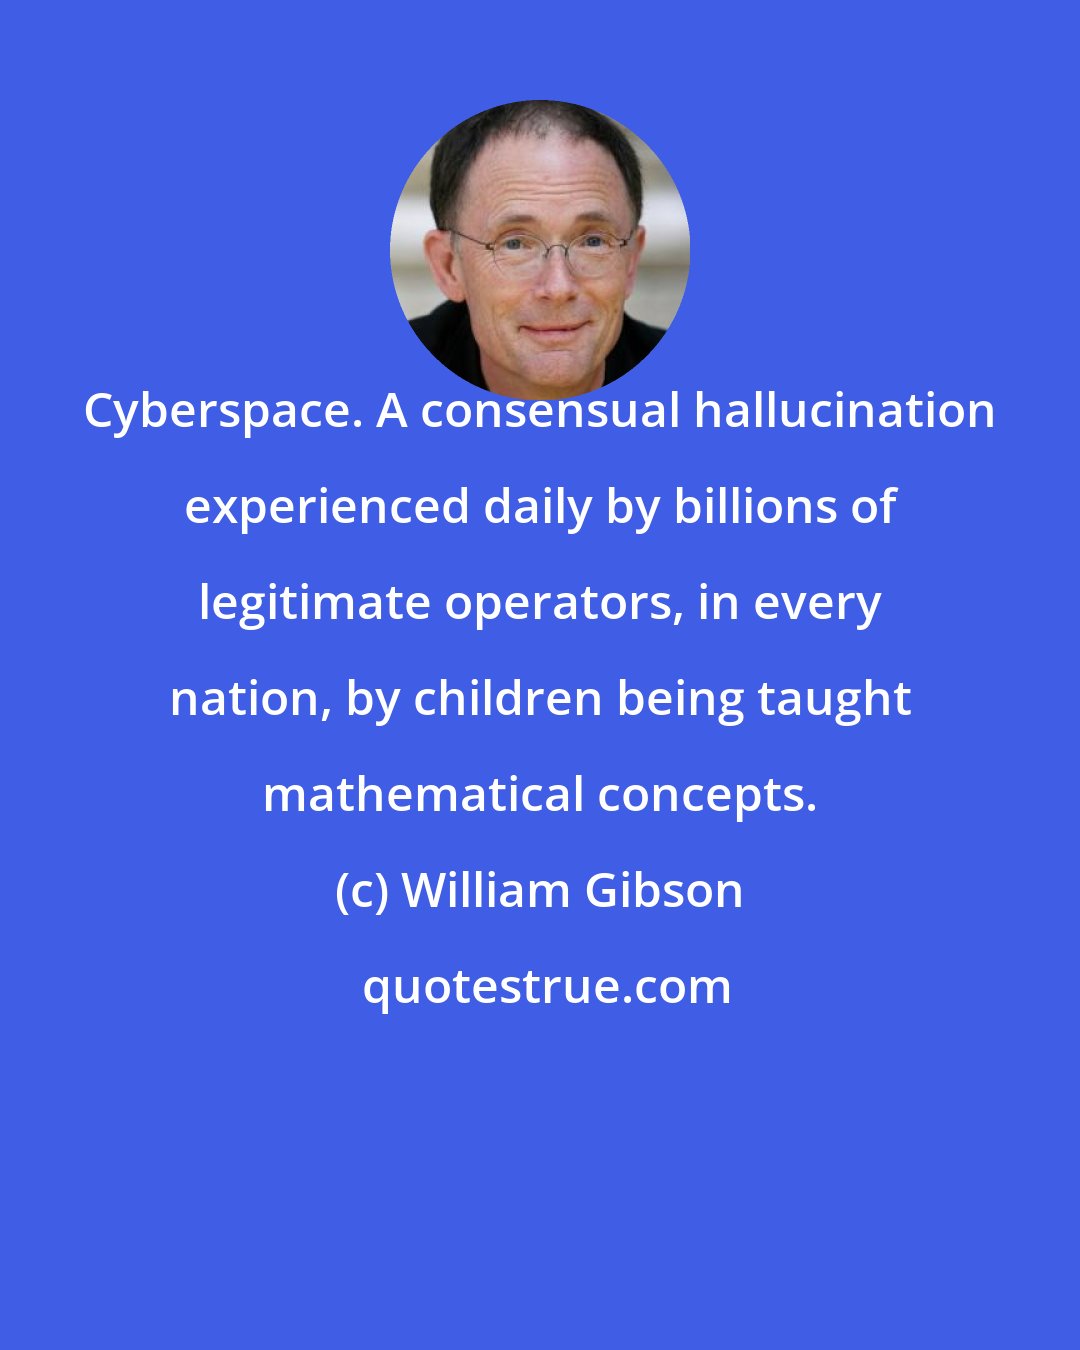 William Gibson: Cyberspace. A consensual hallucination experienced daily by billions of legitimate operators, in every nation, by children being taught mathematical concepts.